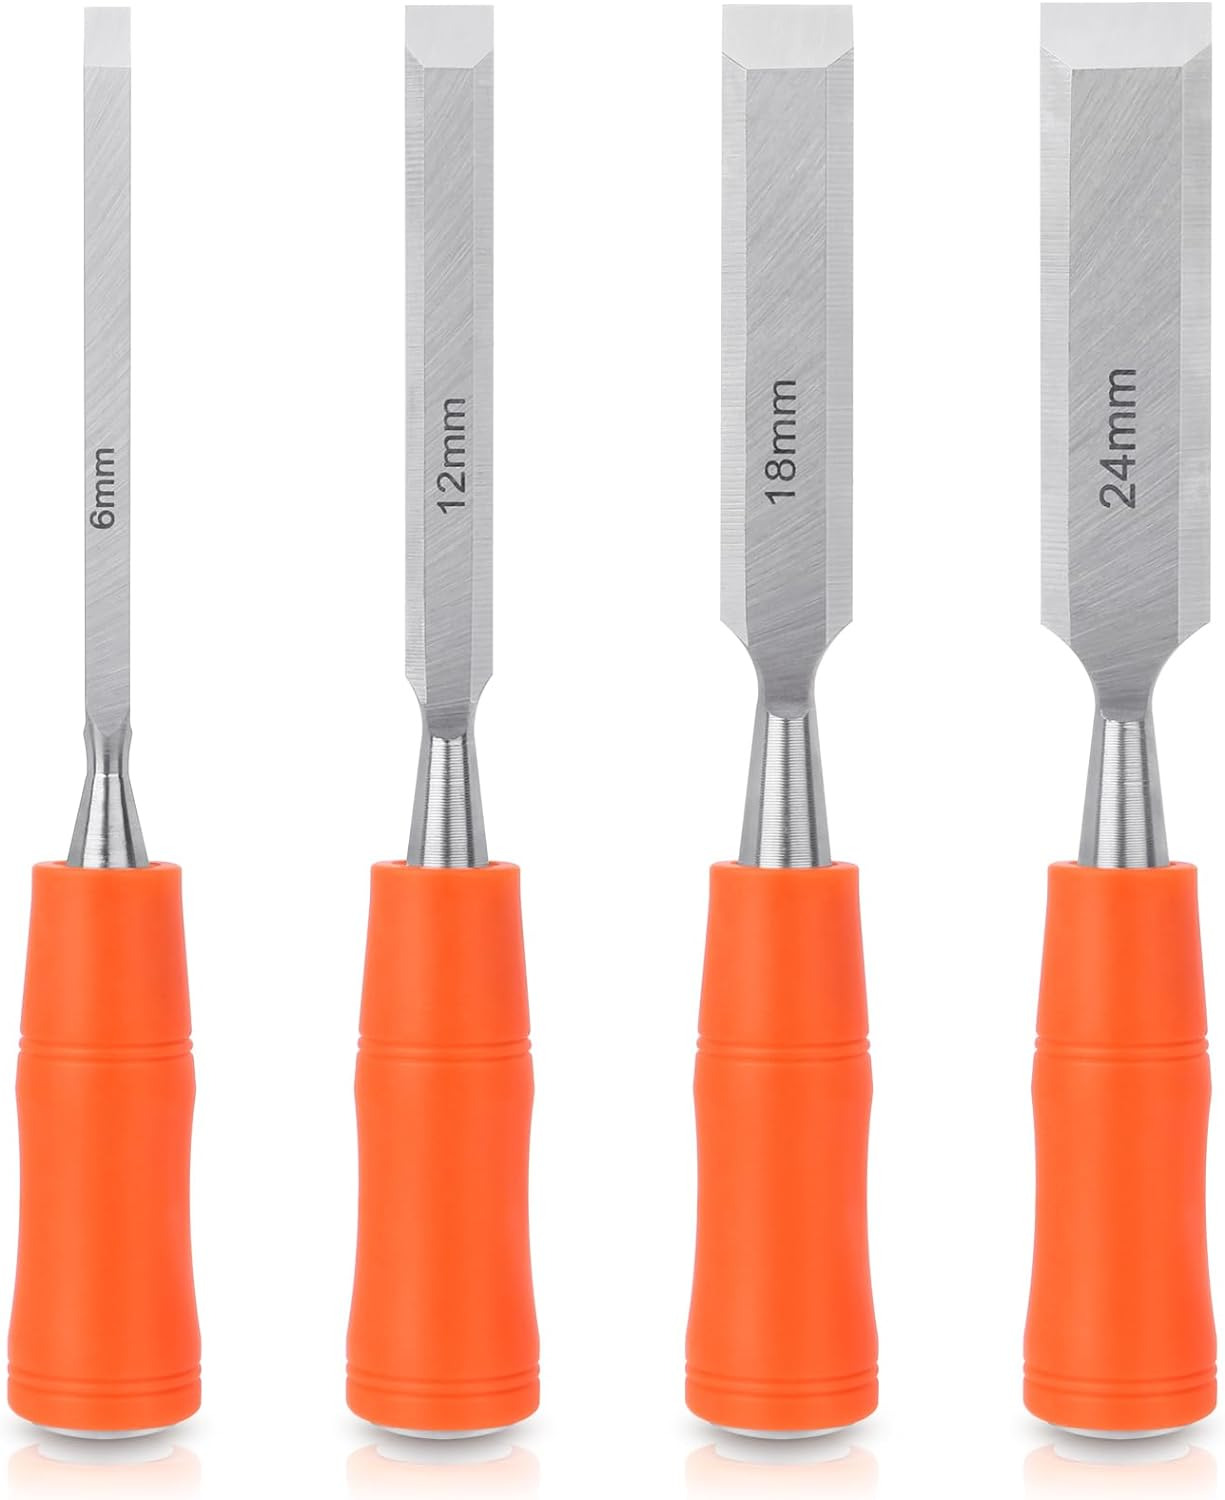 4 Piece Wood Woodworking Chisel Set with Steel Hammer End 6Mm, 12Mm, 18Mm, 24Mm